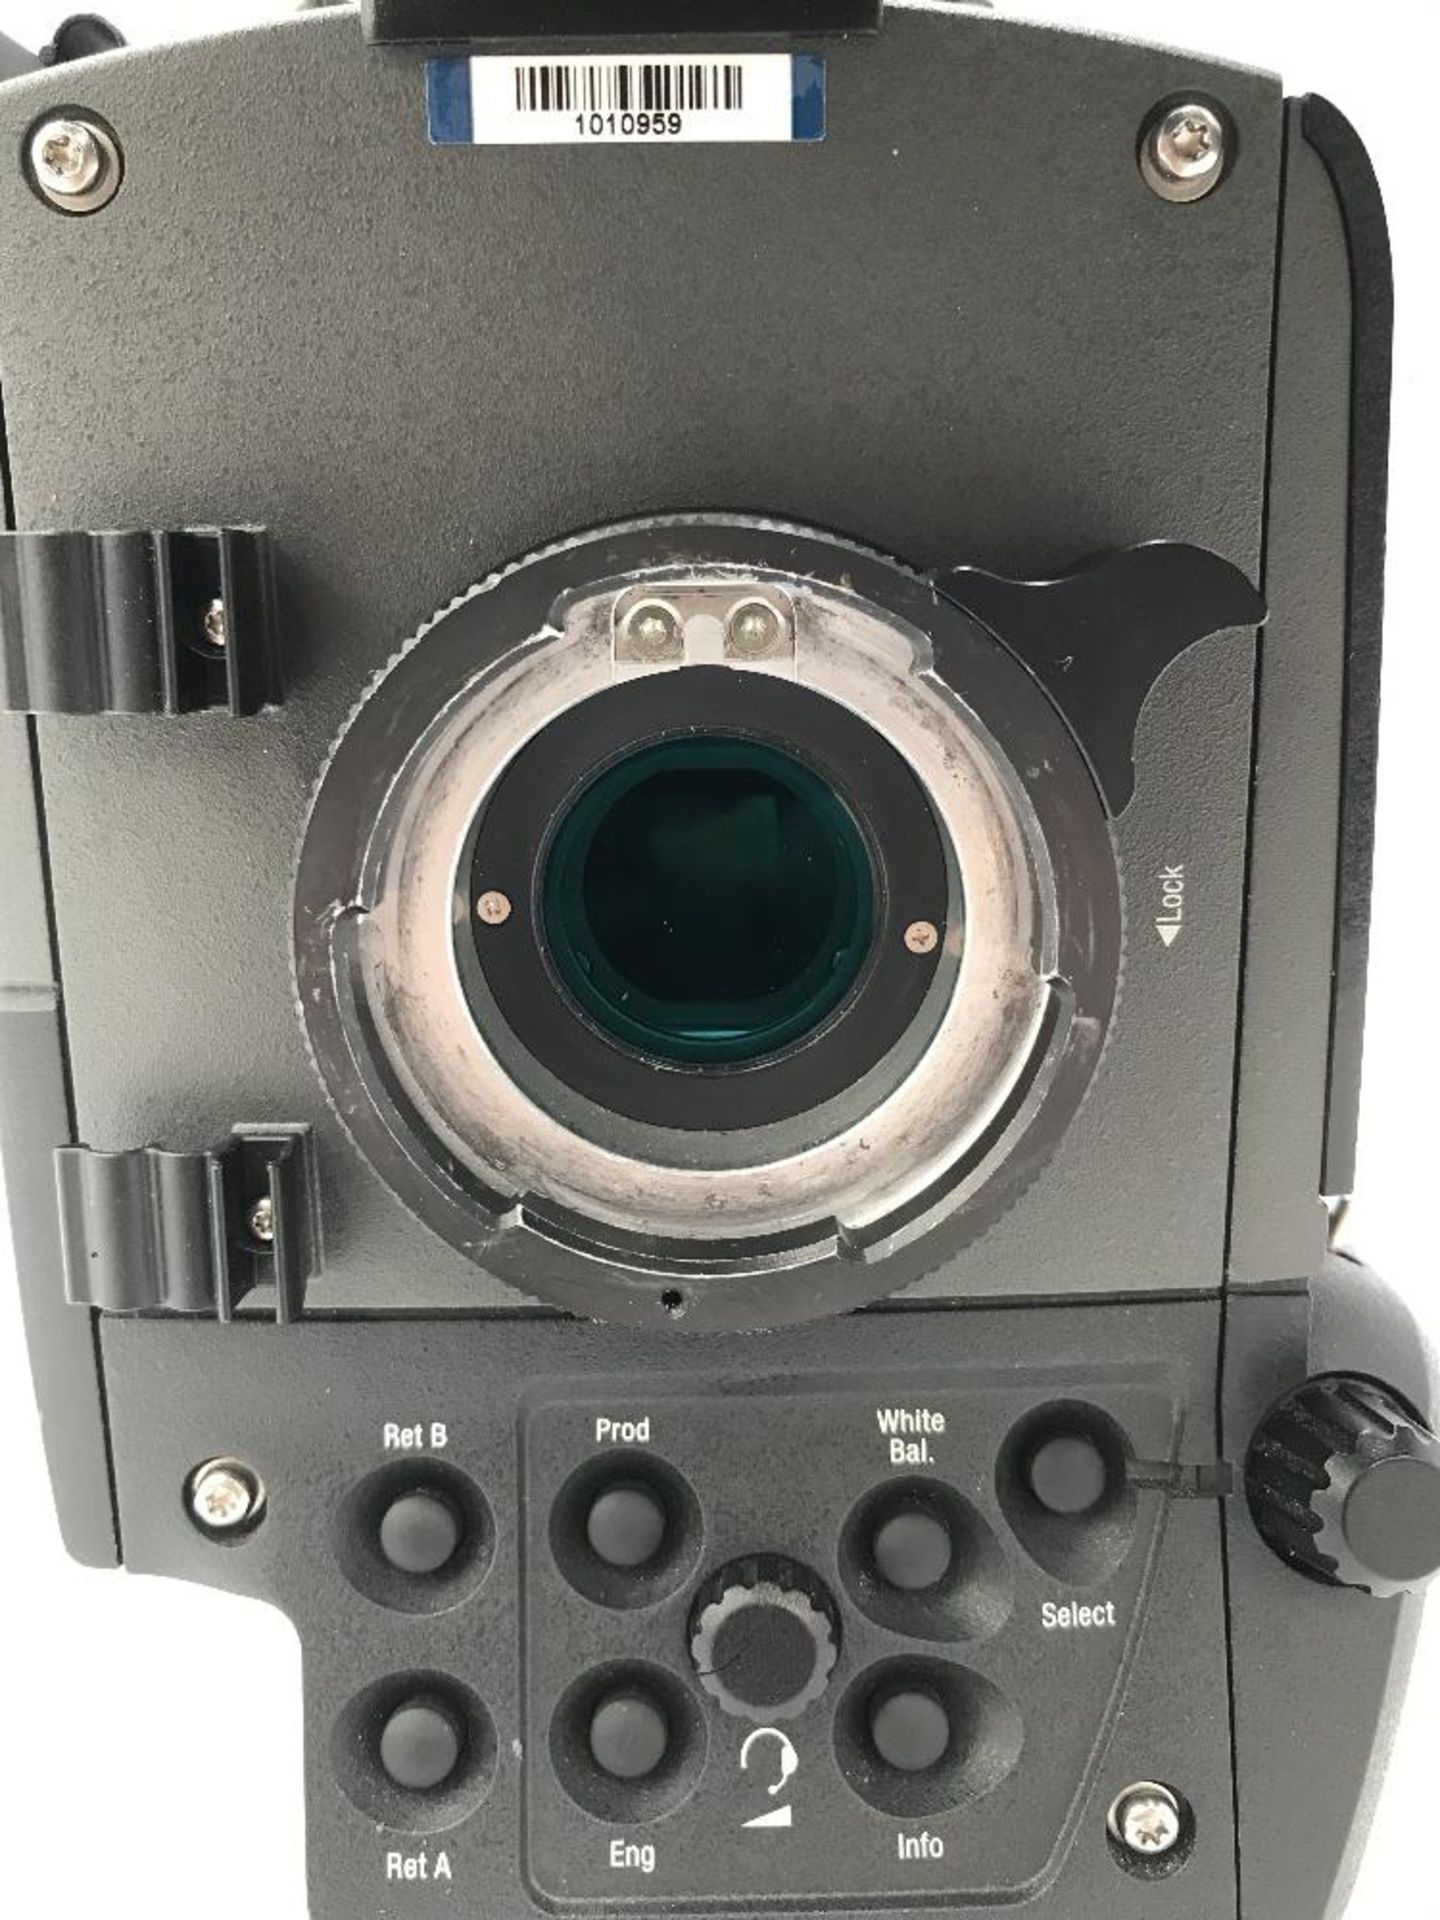 Grass Valley LDX 86N Universe 4K Camera with 7.4'' OLED Viewfinder & Camera Control Unit - Image 6 of 16